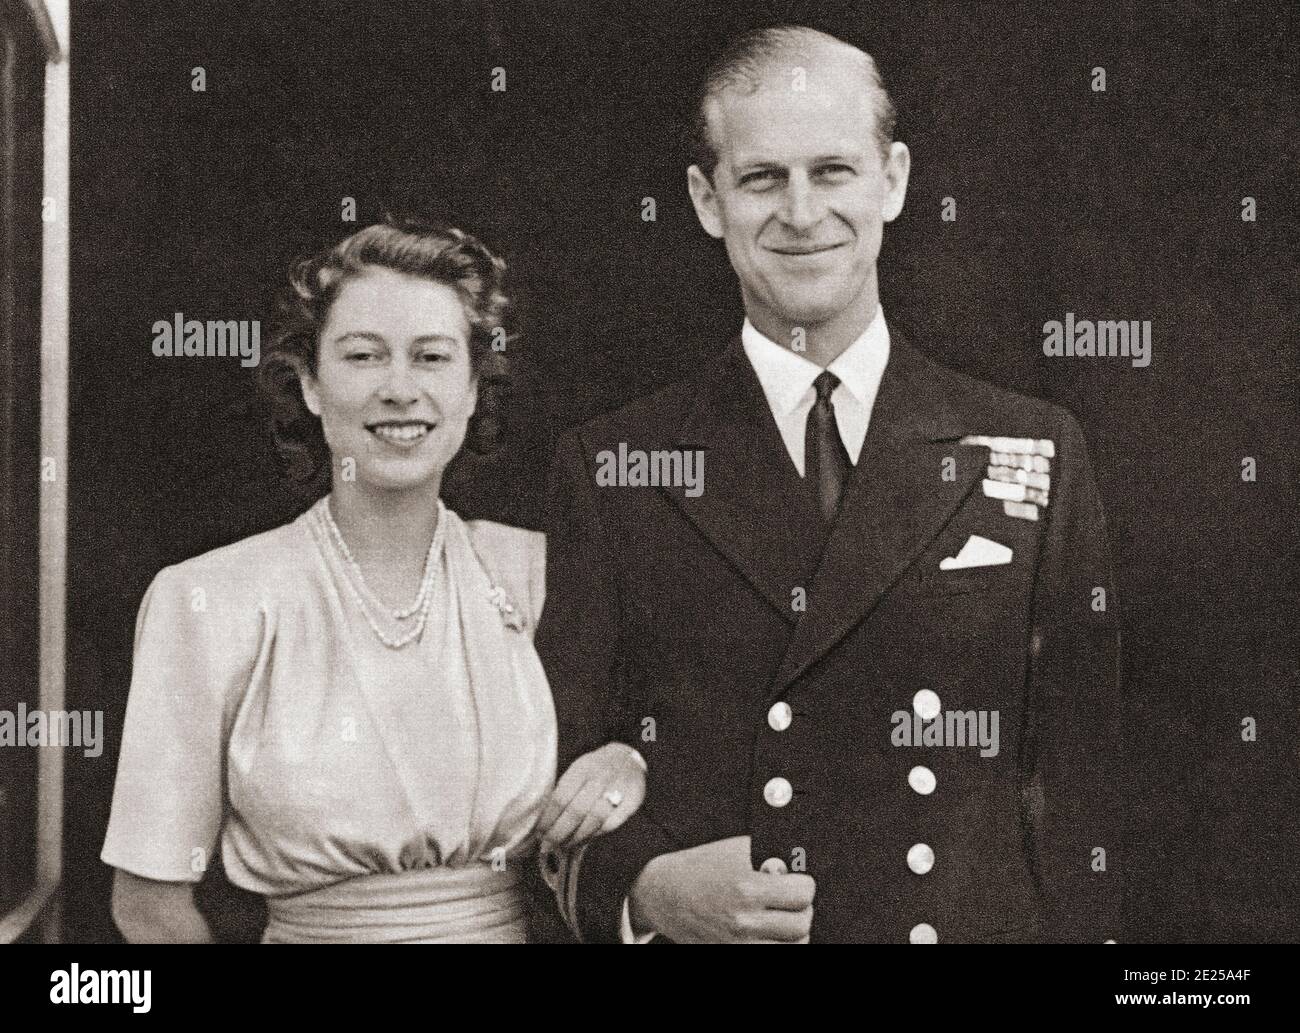 EDITORIAL ONLY Princess Elizabeth of York and the Duke of Edinburgh, seen here on the announcement of their engagement in 1947. Princess Elizabeth of York, future Elizabeth II, born 1926.  Queen of the United Kingdom.  Prince Philip, Duke of Edinburgh (born Prince Philip of Greece and Denmark,1921- 2021). Future husband of Queen Elizabeth II of the United Kingdom and other Commonwealth realms.  From The Queen Elizabeth Coronation Book, published 1953. Stock Photo